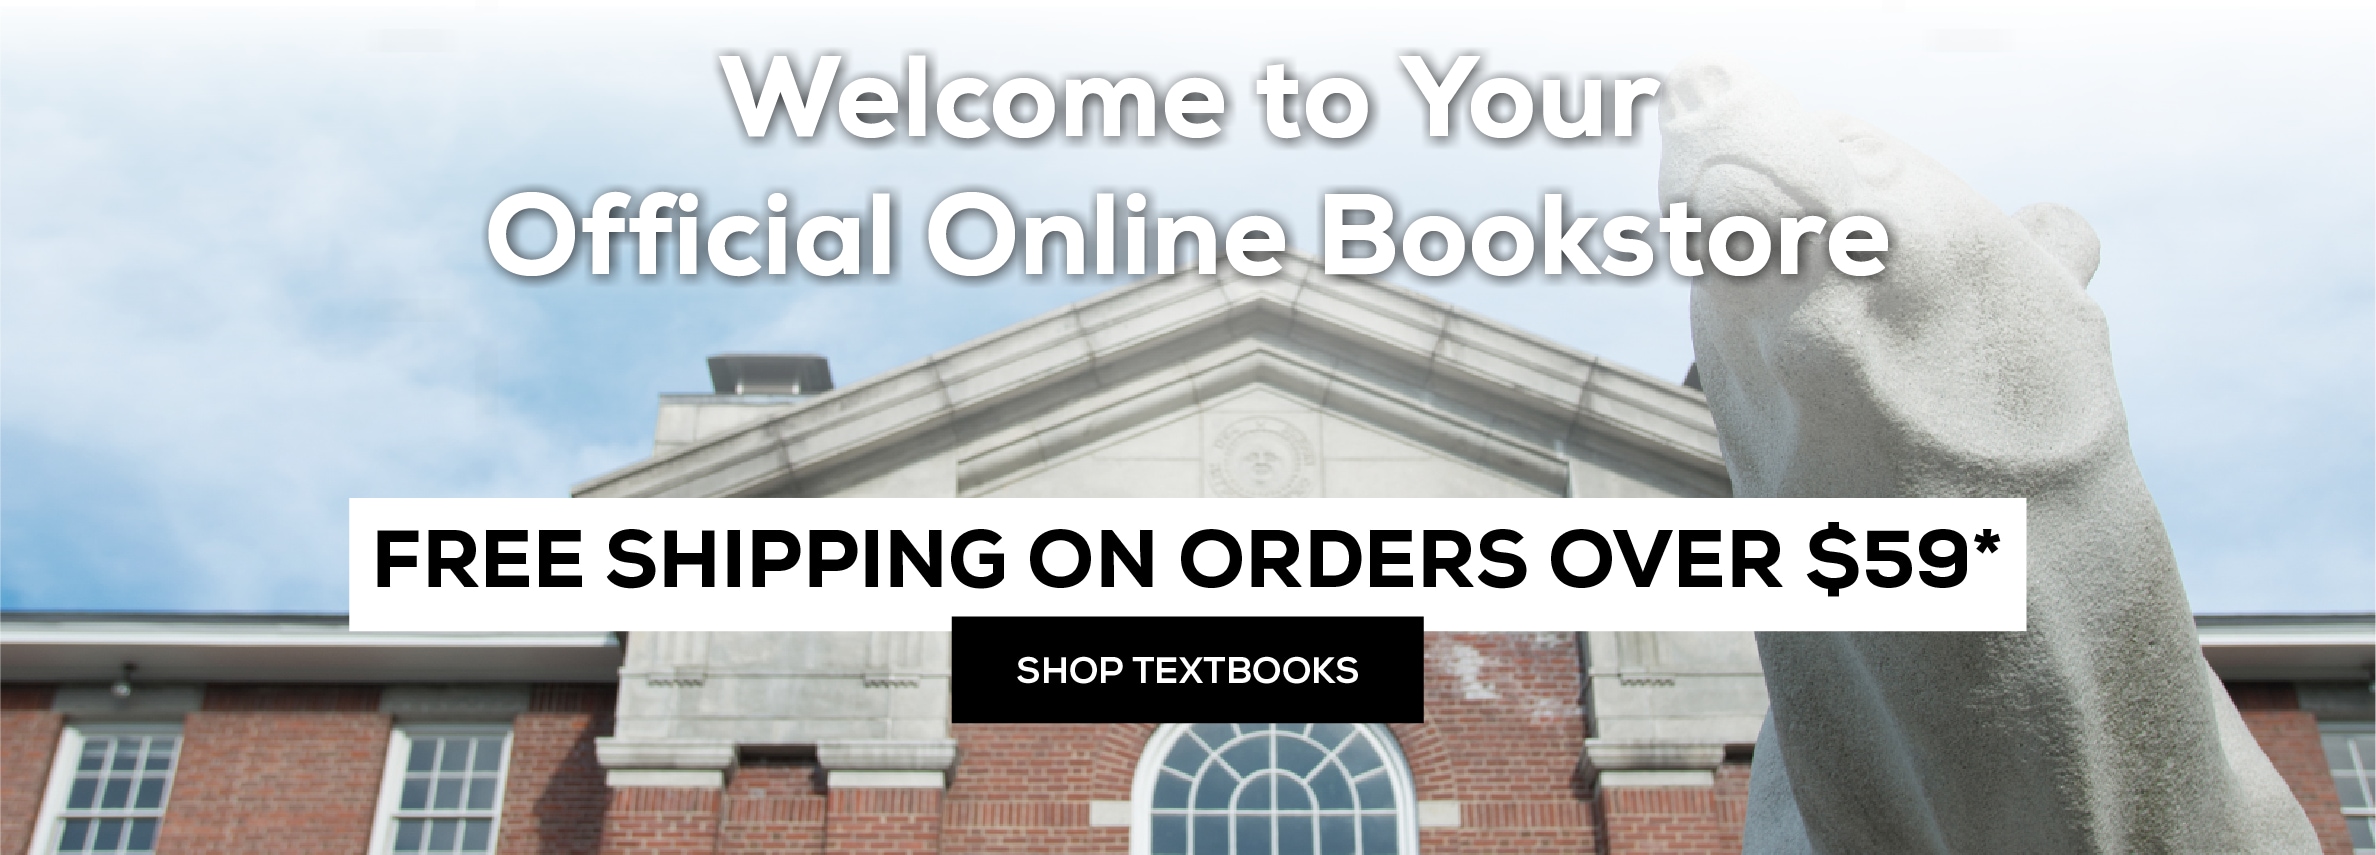 Welcome to your official online bookstore. Free shipping on orders over $59. Shop textbooks